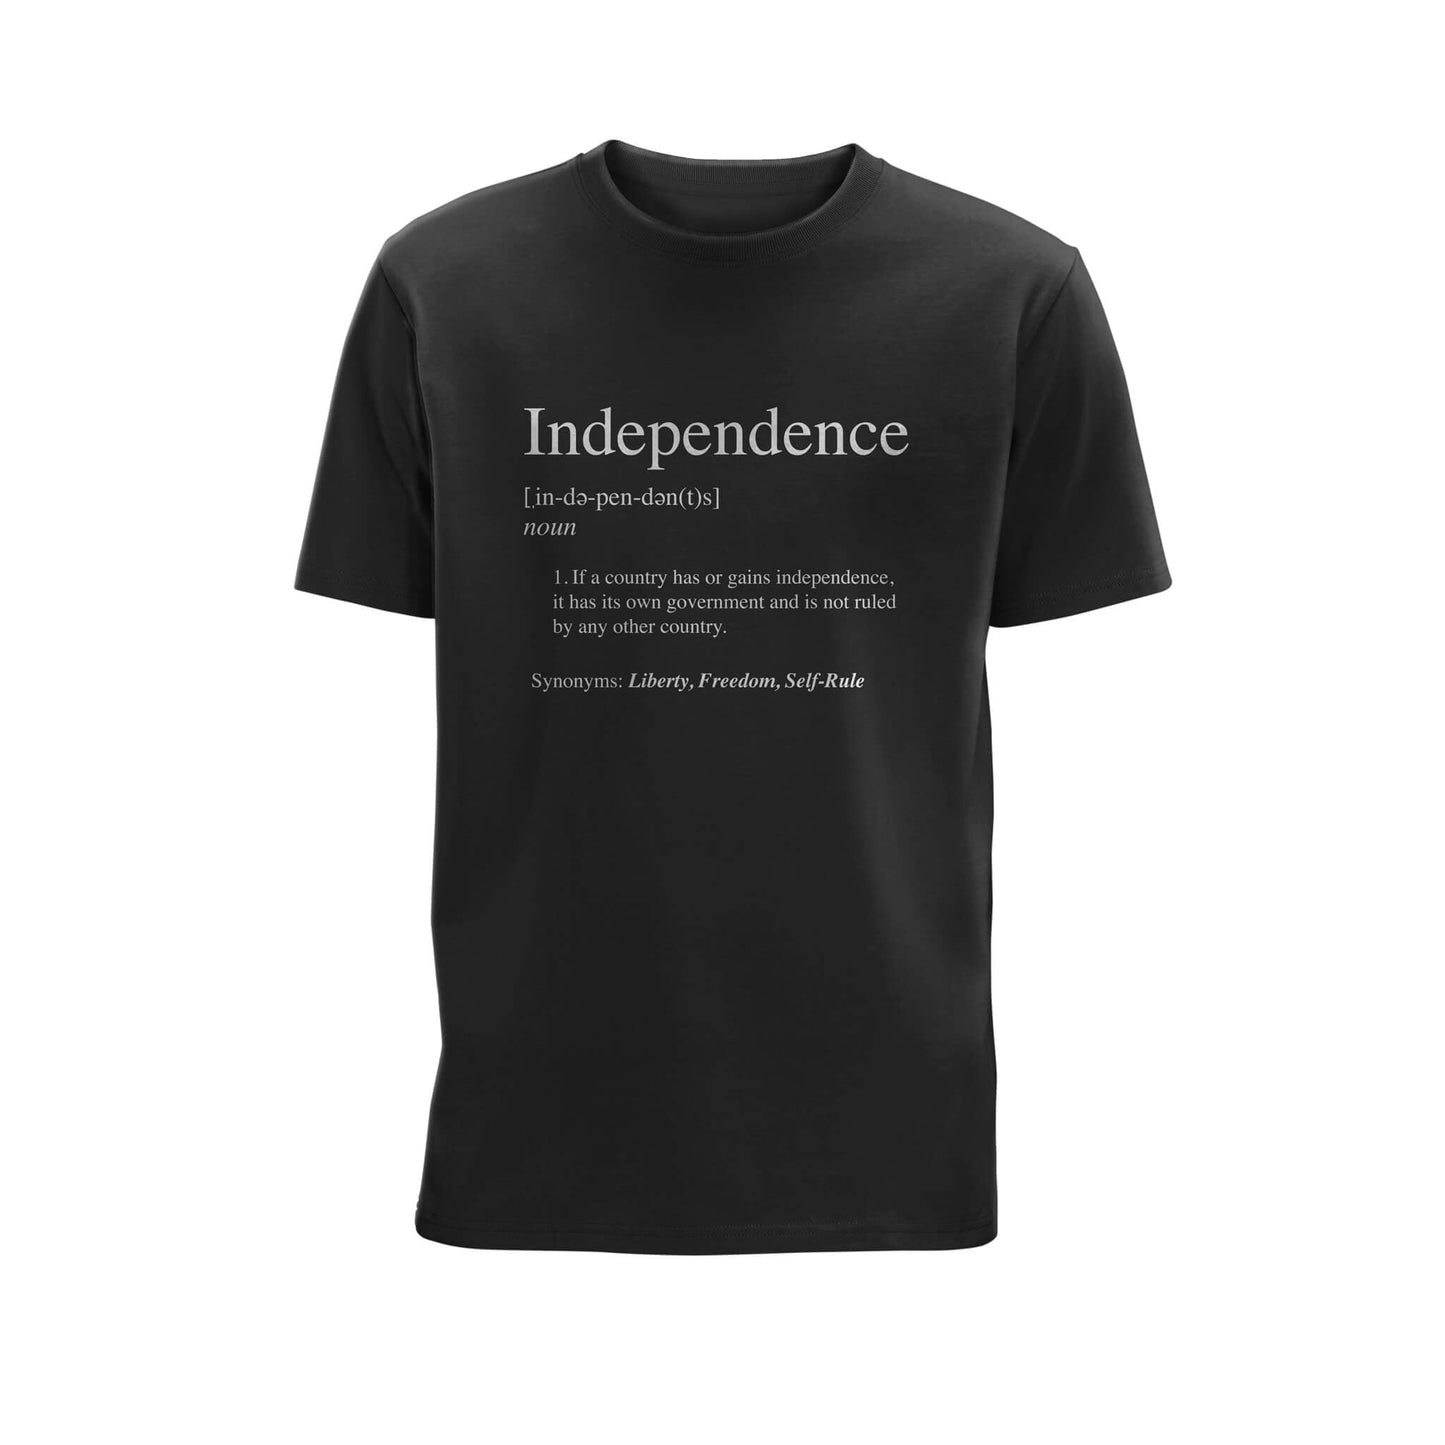 Independence Definition Organic Cotton T-Shirt - Black - SNP Store